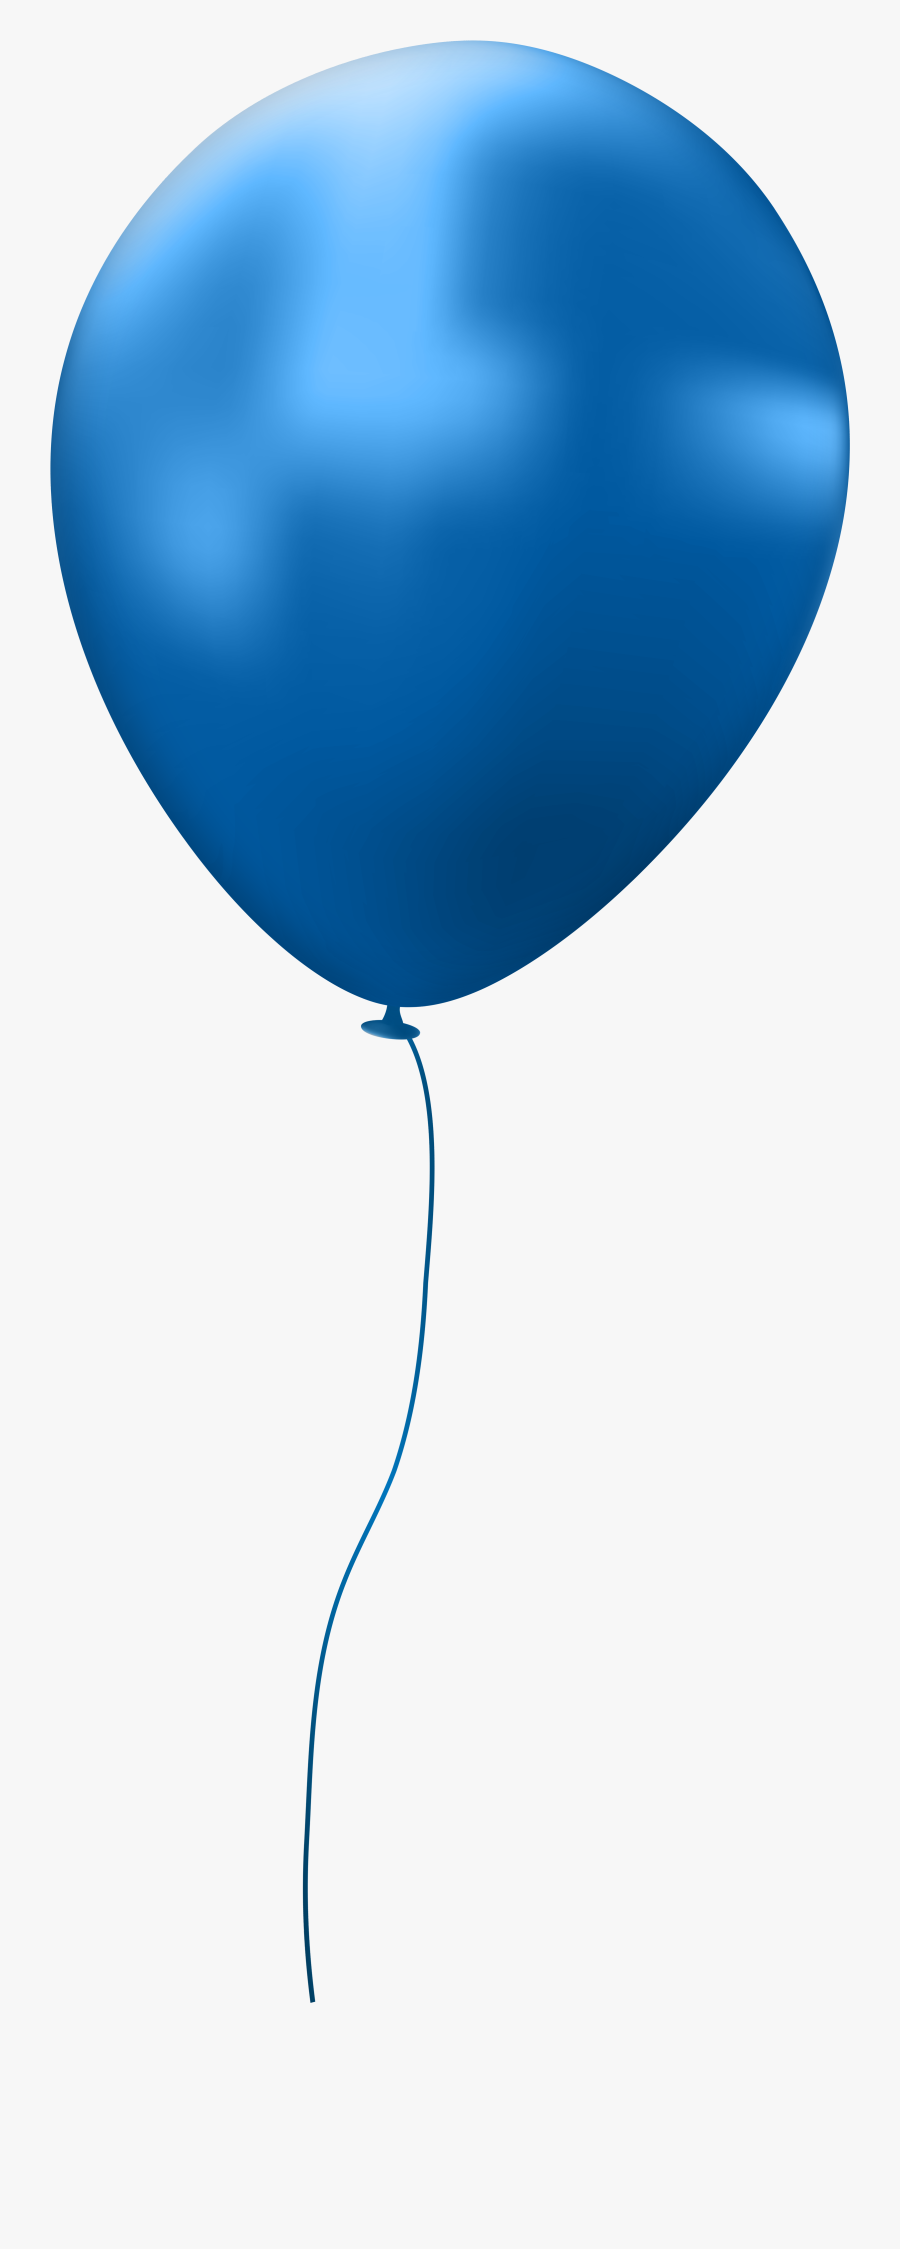 Blue Balloons Png - Single Balloons Transparent Background, Transparent Clipart